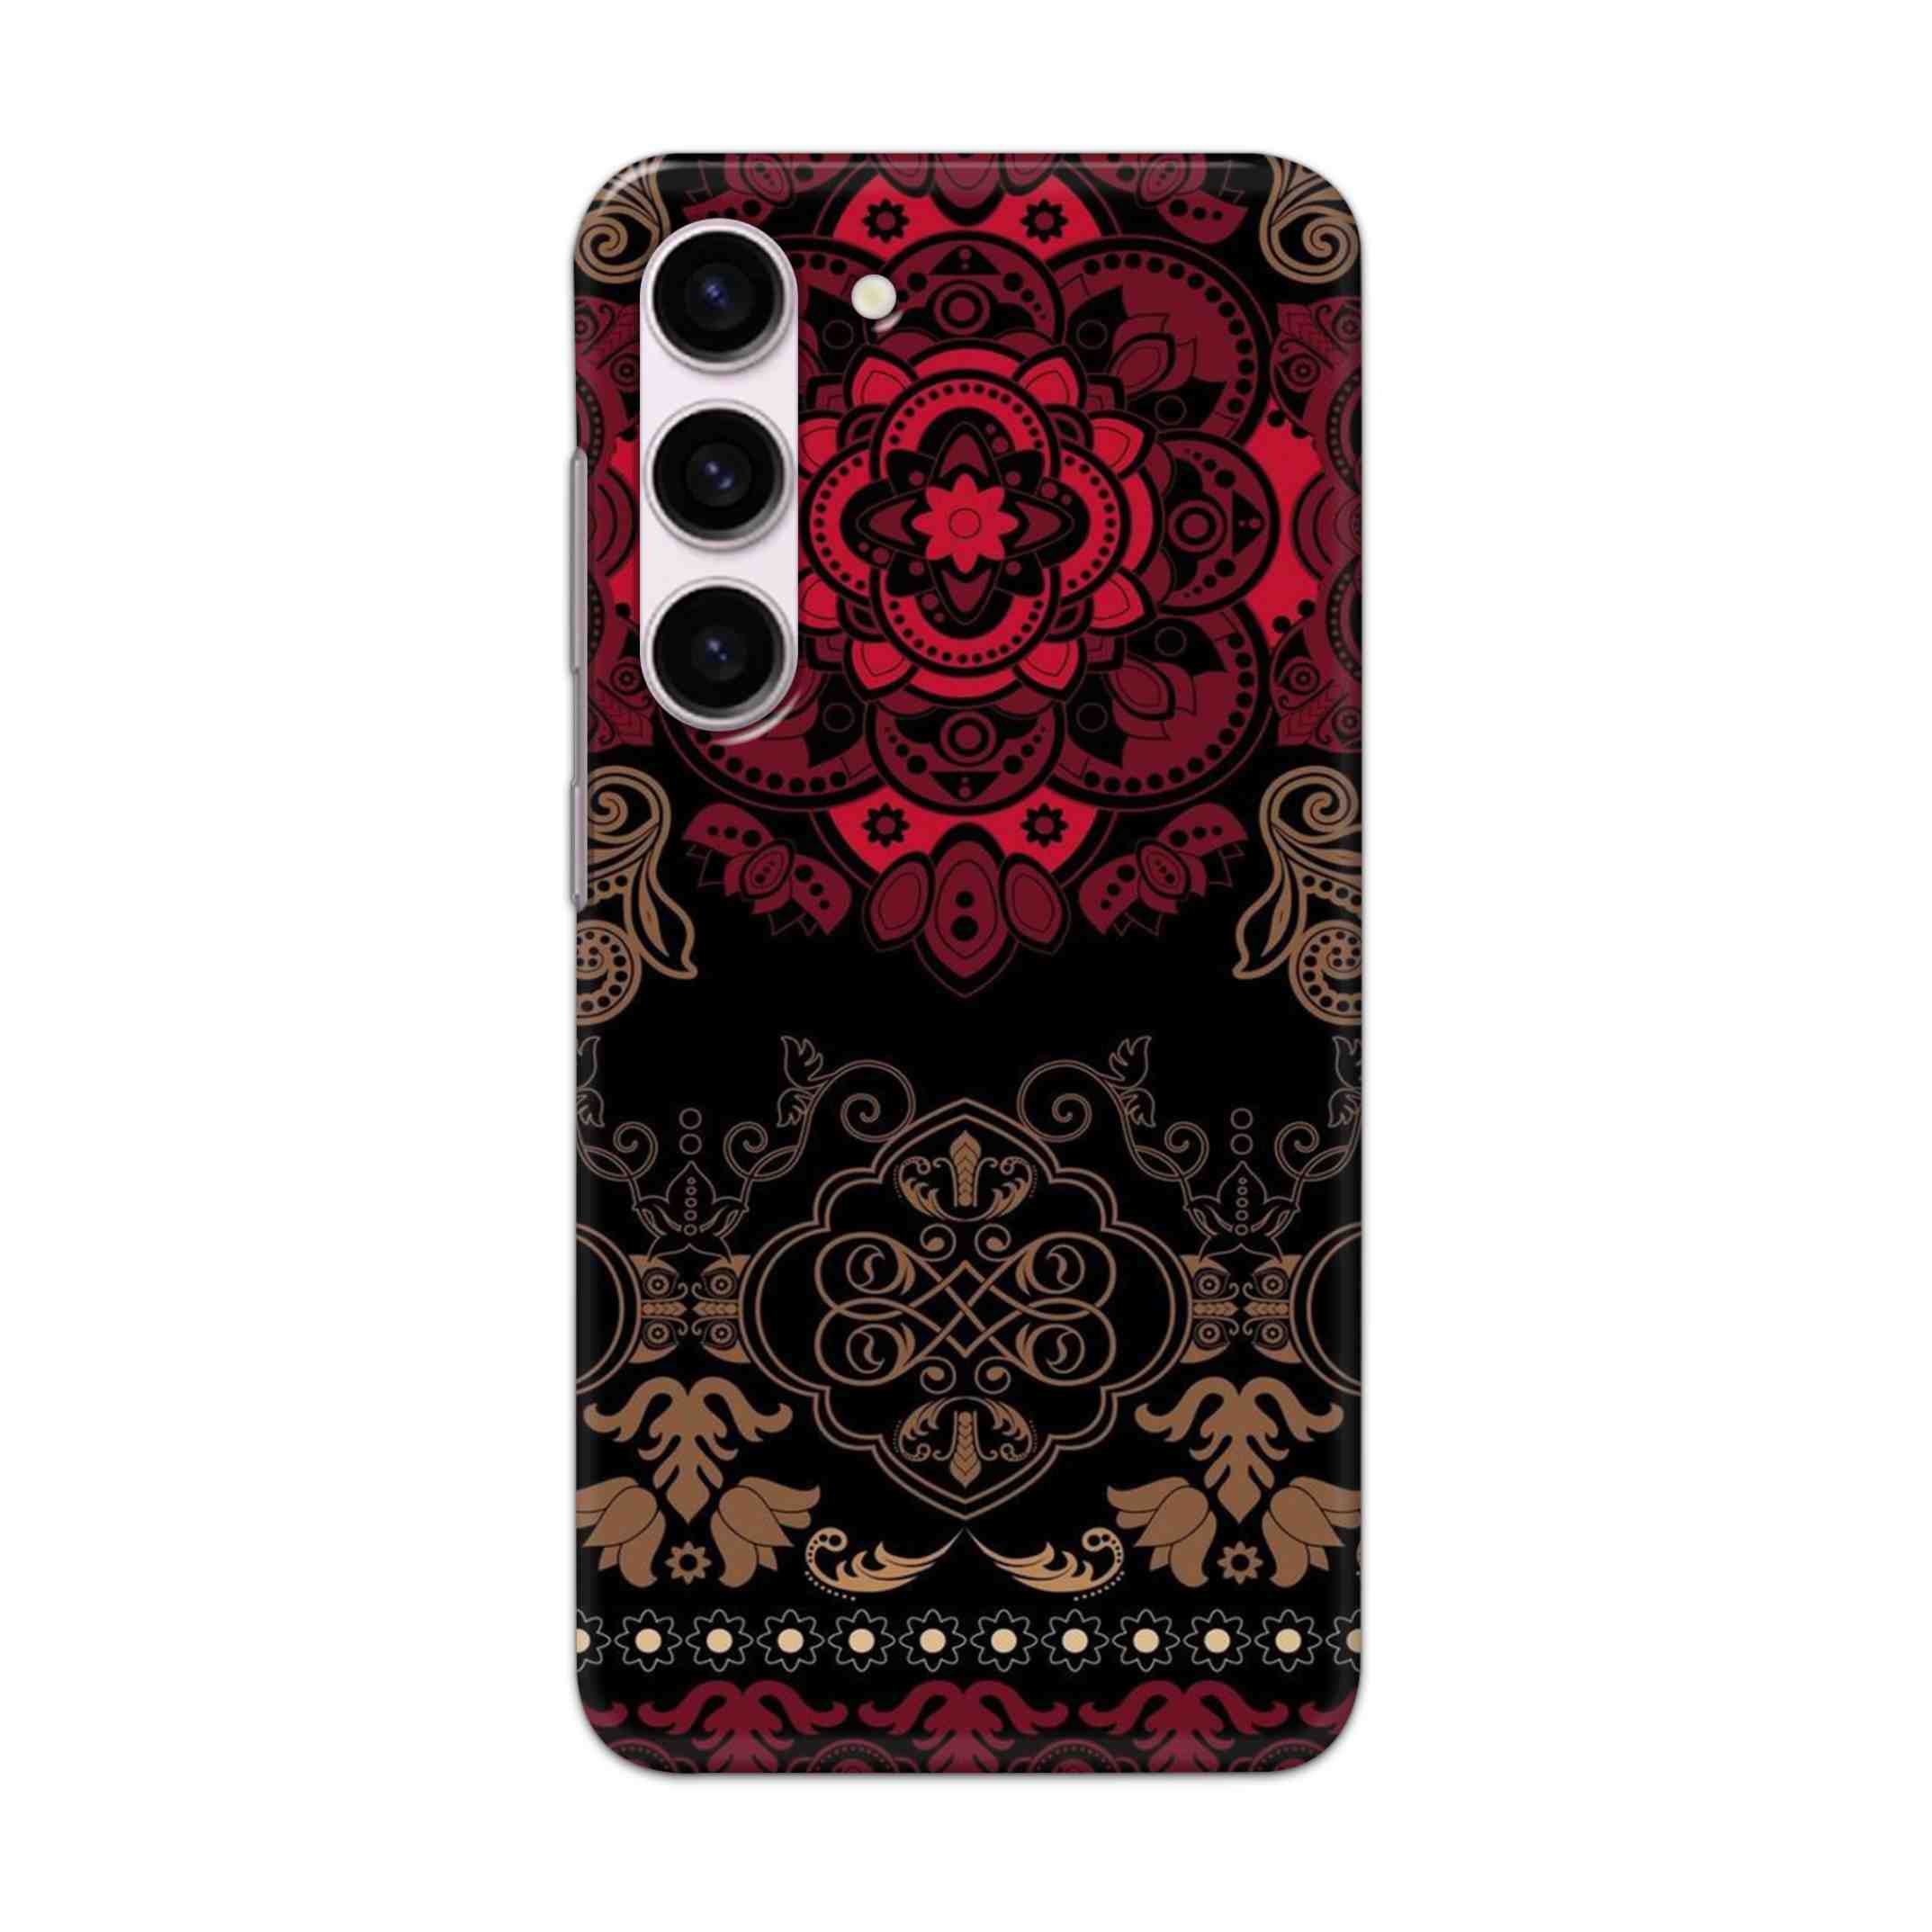 Buy Christian Mandalas Hard Back Mobile Phone Case Cover For Samsung Galaxy S23 Online